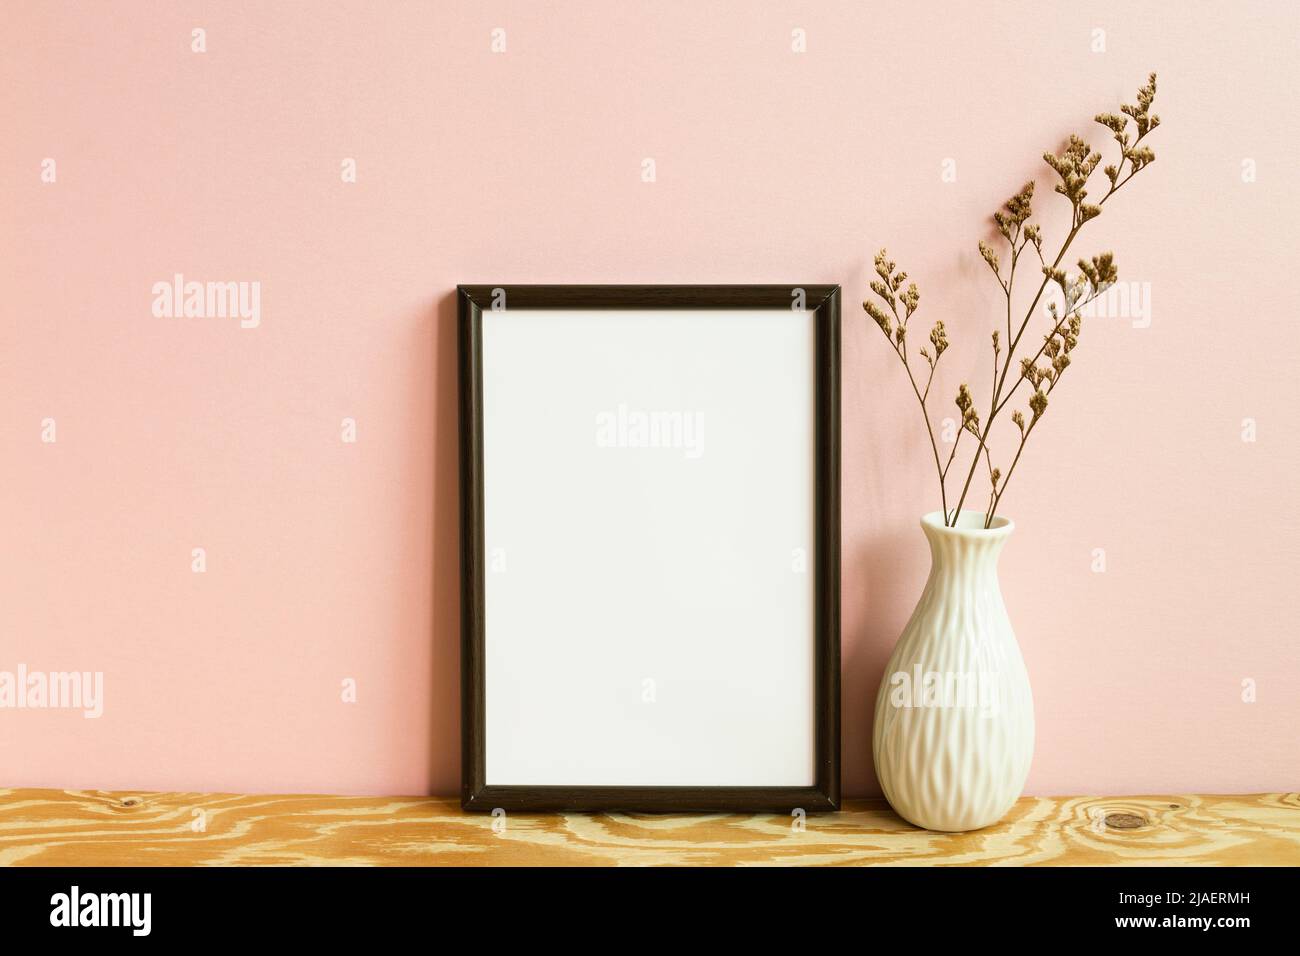 Picture frame and dry flowers on wooden table. pink wall background. copy space Stock Photo